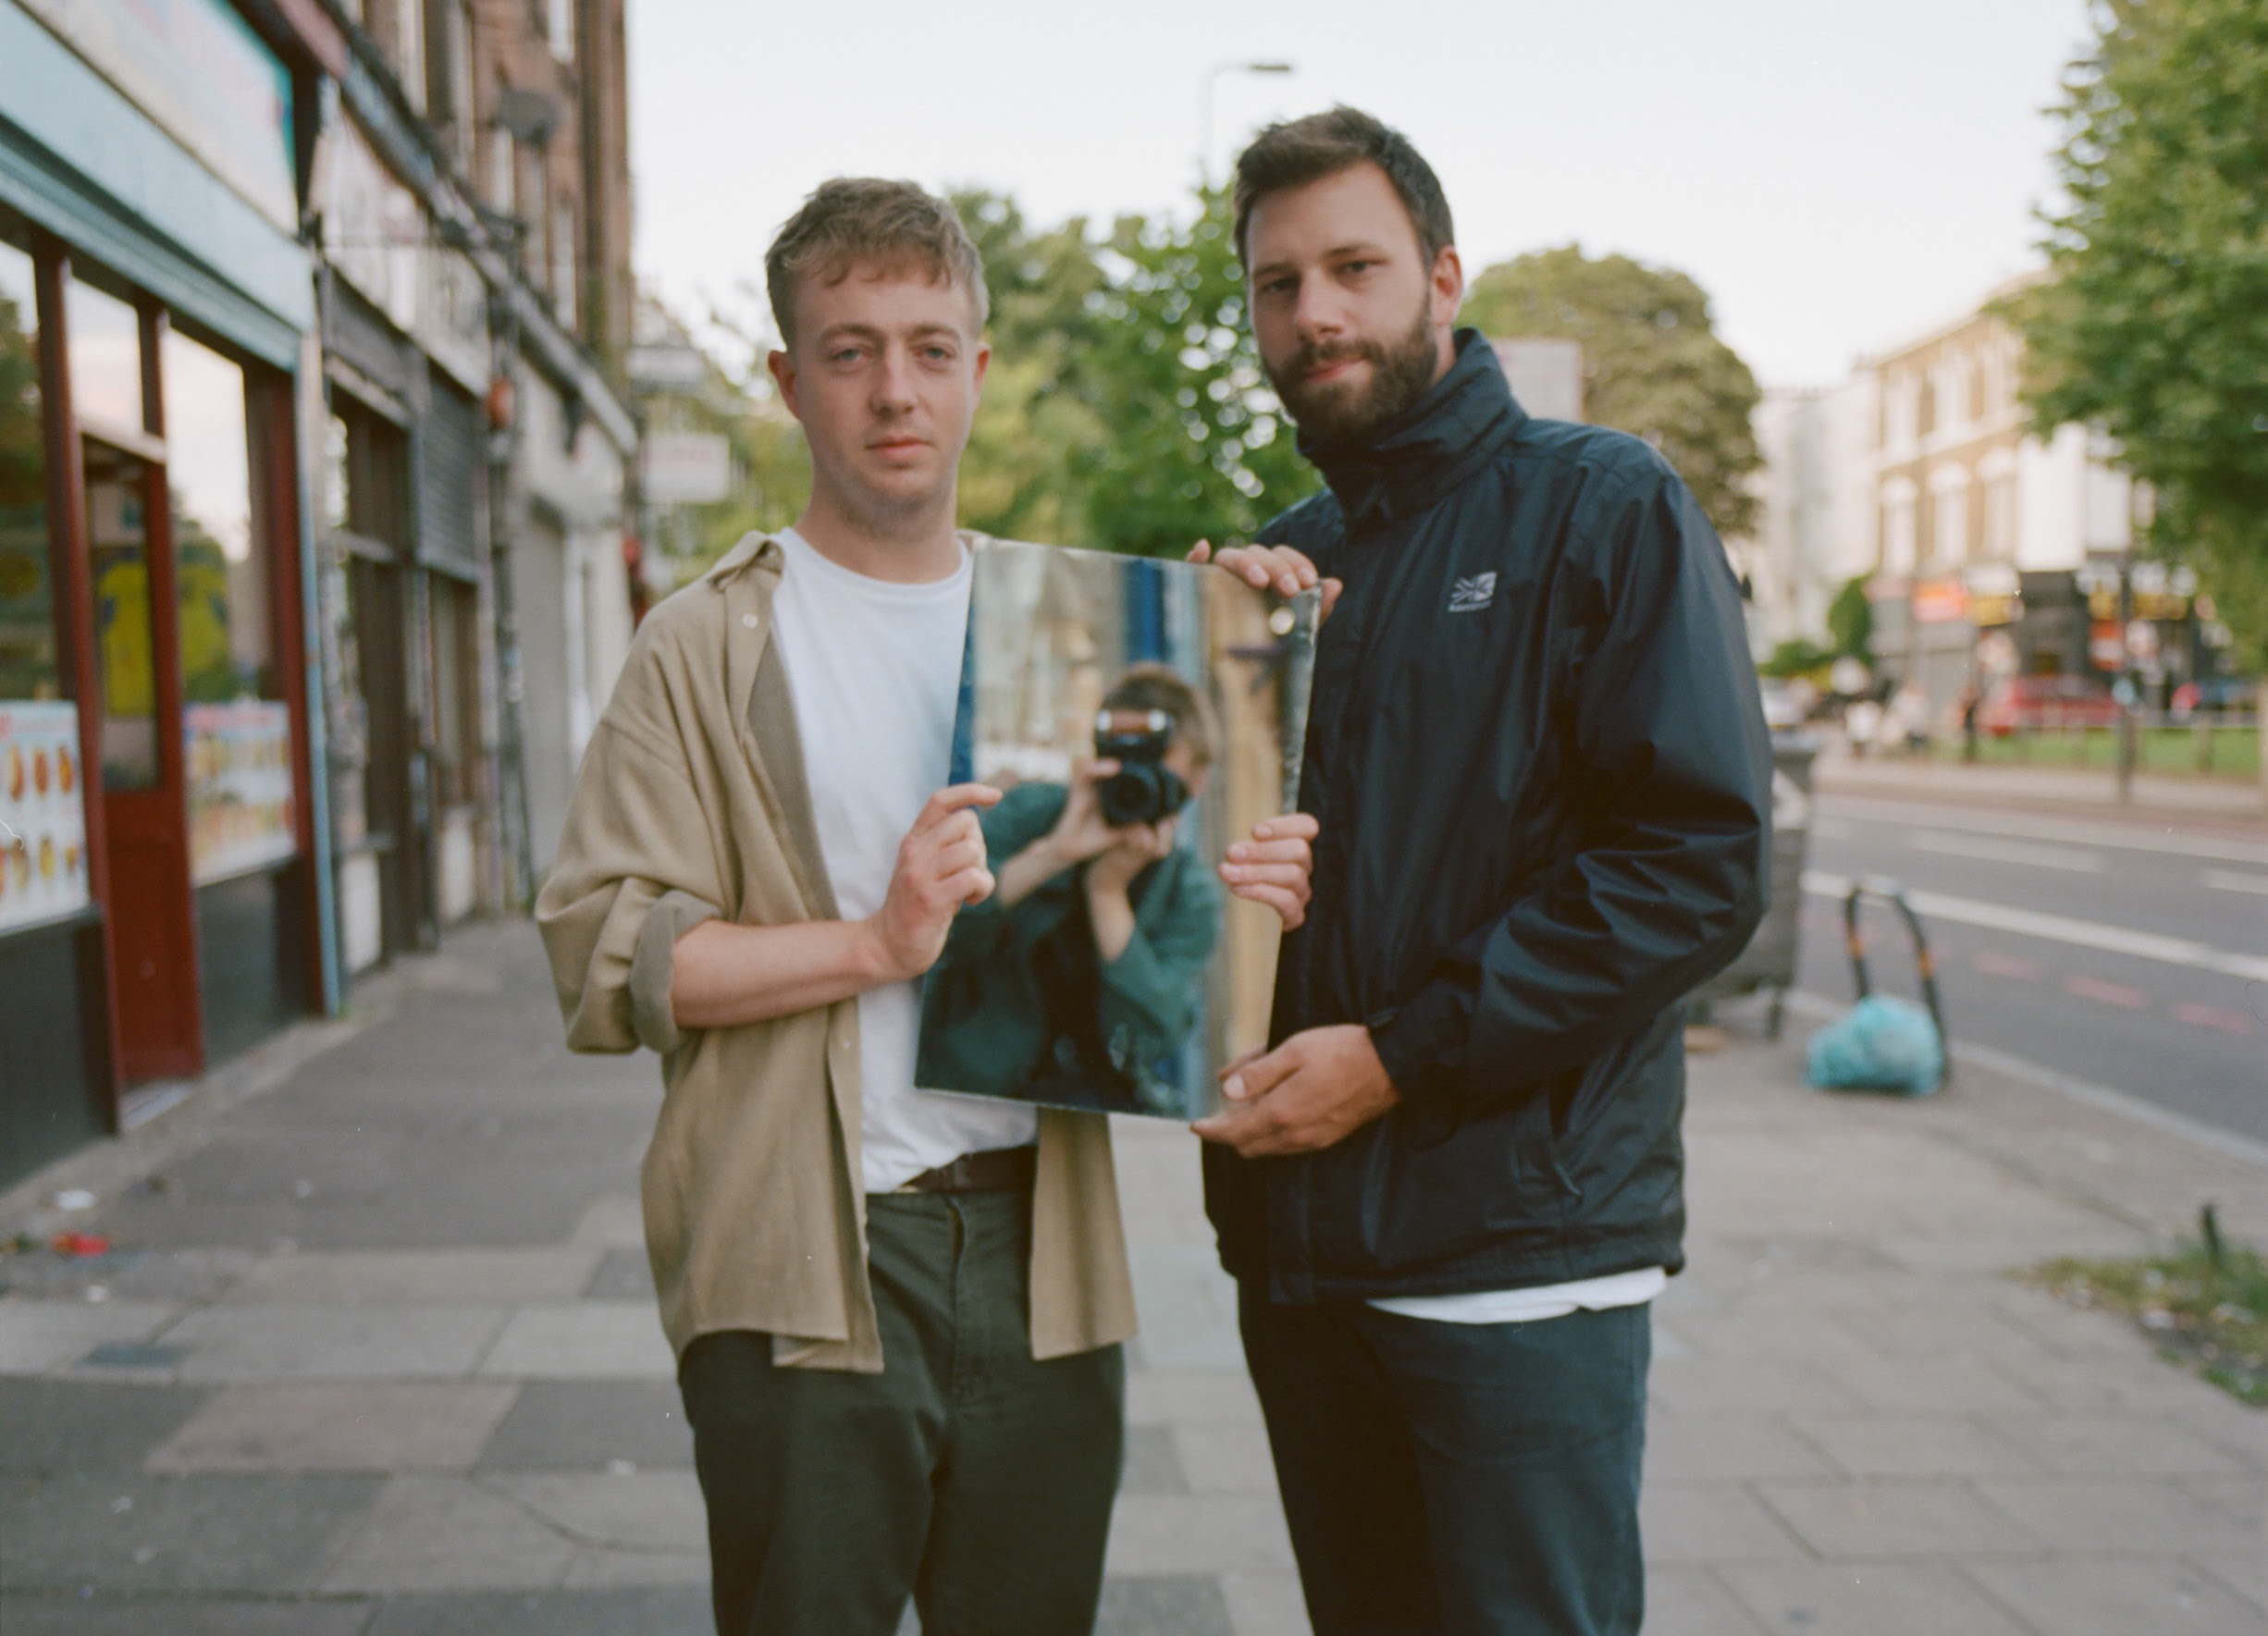 Mount Kimbie debuts new track featuring King Krule